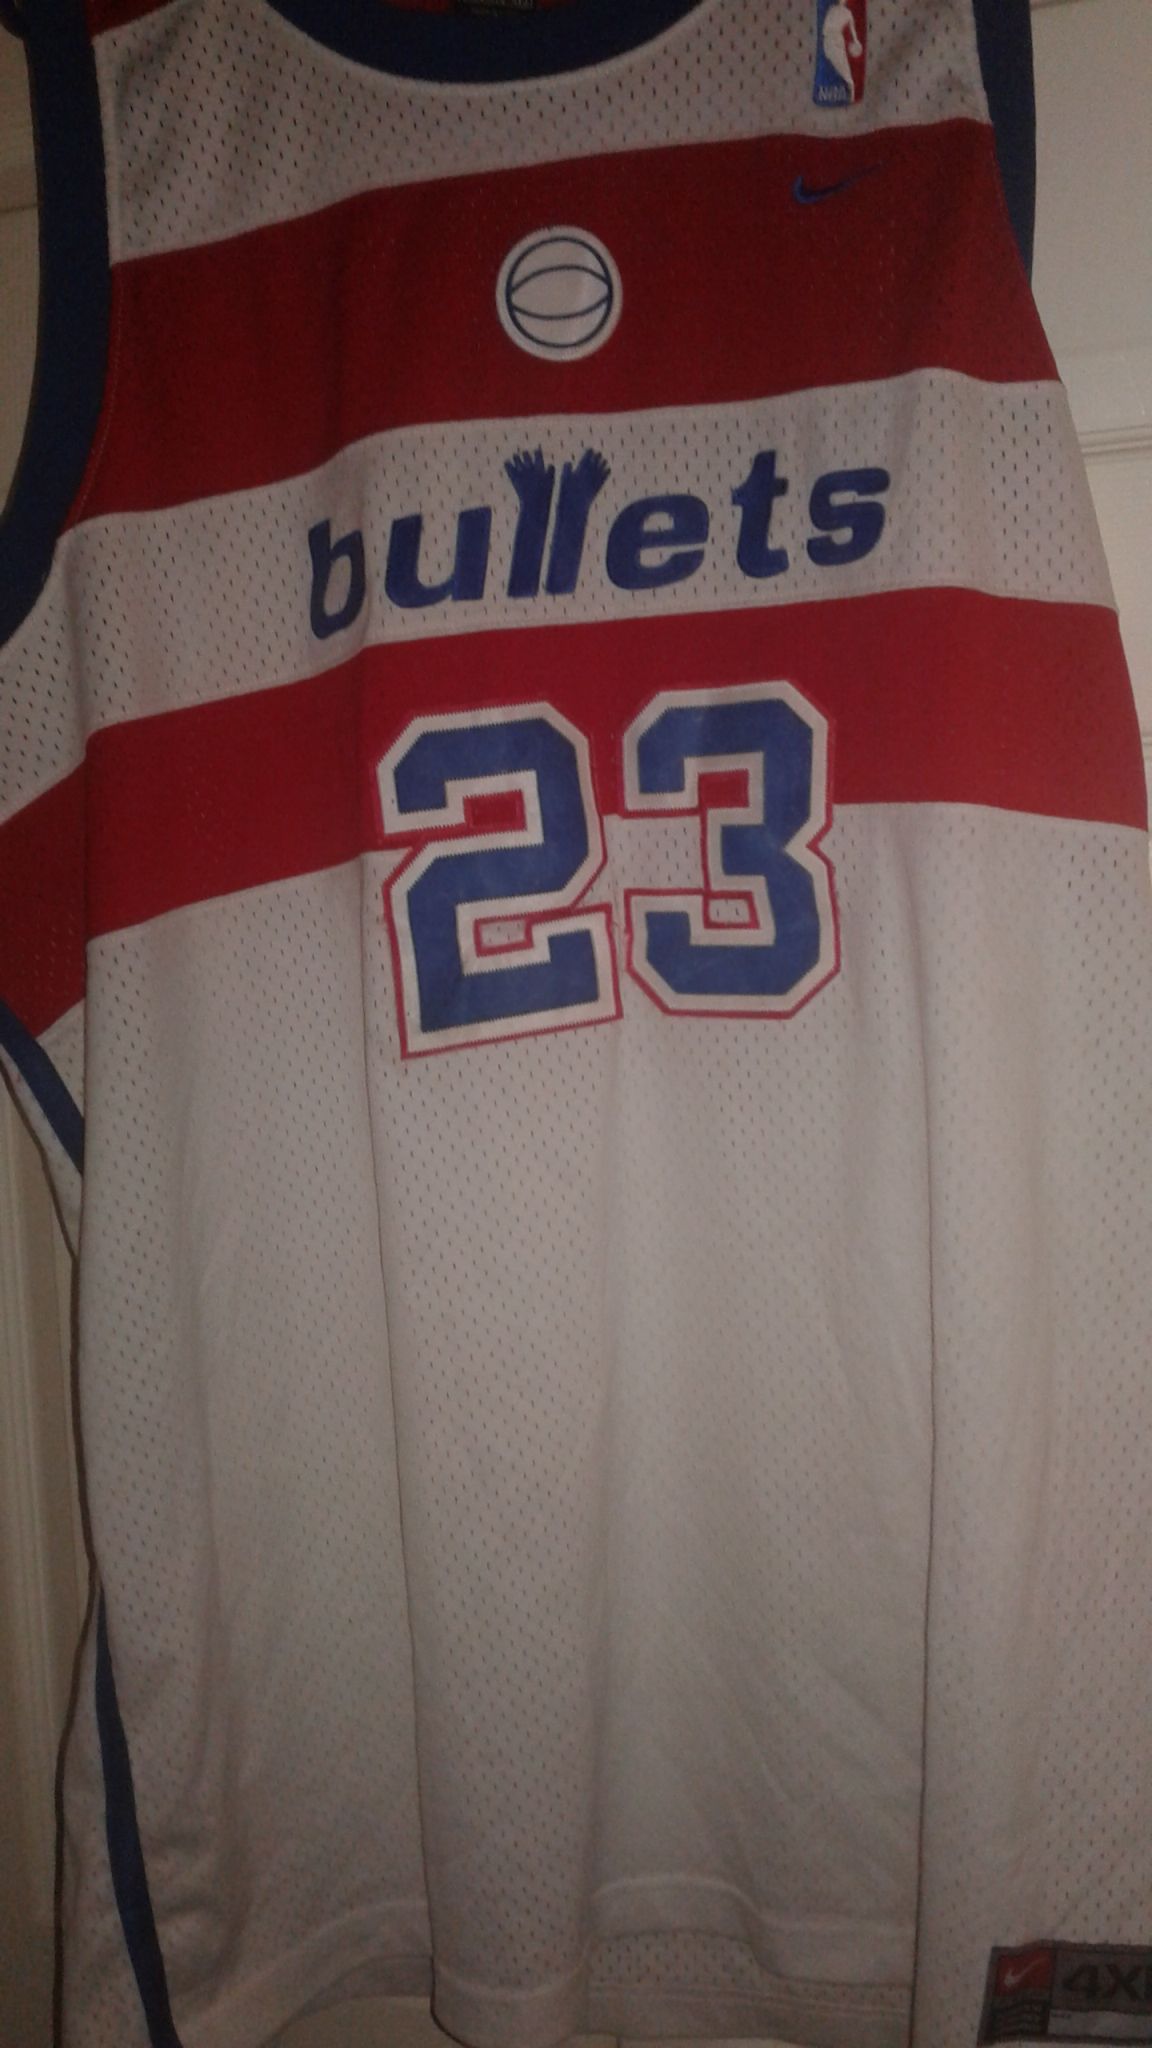 4xxxx Bullets Jersey serious buyers only please